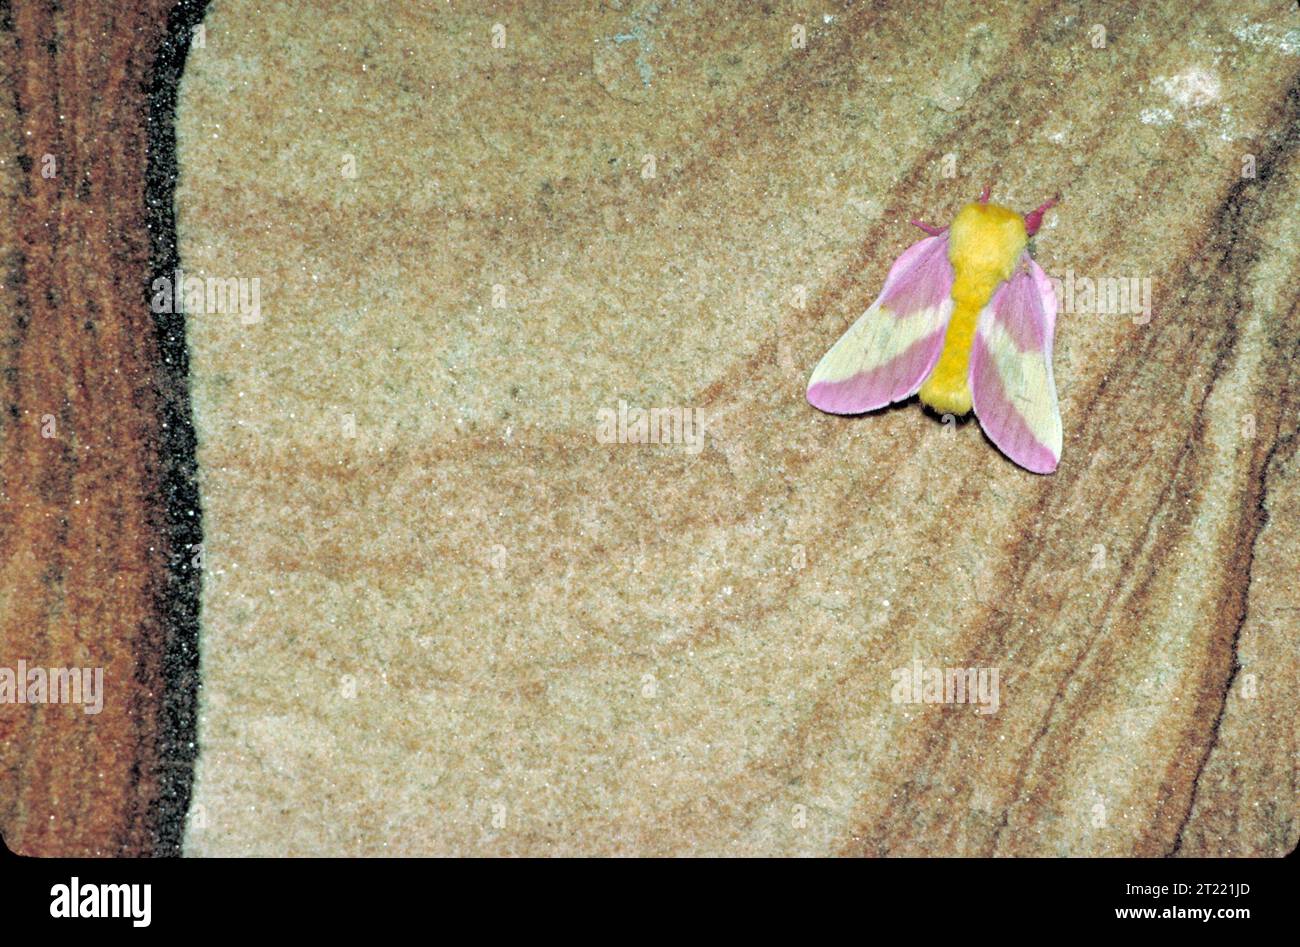 Moth with fuzzy yellow body and pink and white wings, viewed from above resting on stone. Subjects: Insects; Invertebrates.   Collection: Invertebrates.. 1998 - 2011. Stock Photo